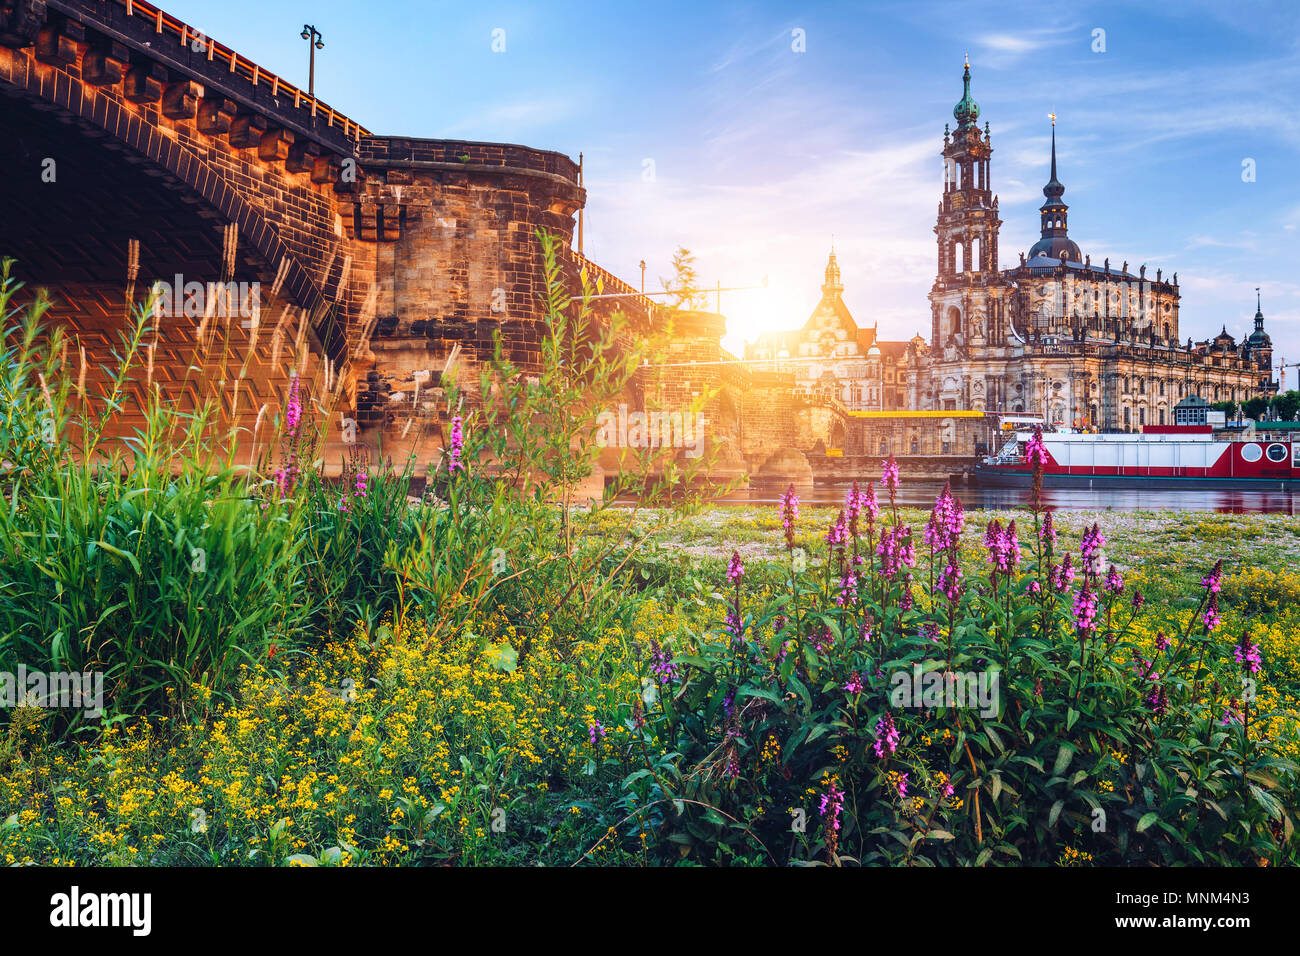 Augustus Bridge (Augustusbrucke) and Cathedral of the Holy Trinity (Hofkirche) over the River Elbe in Dresden, Germany, Saxony. Stock Photo